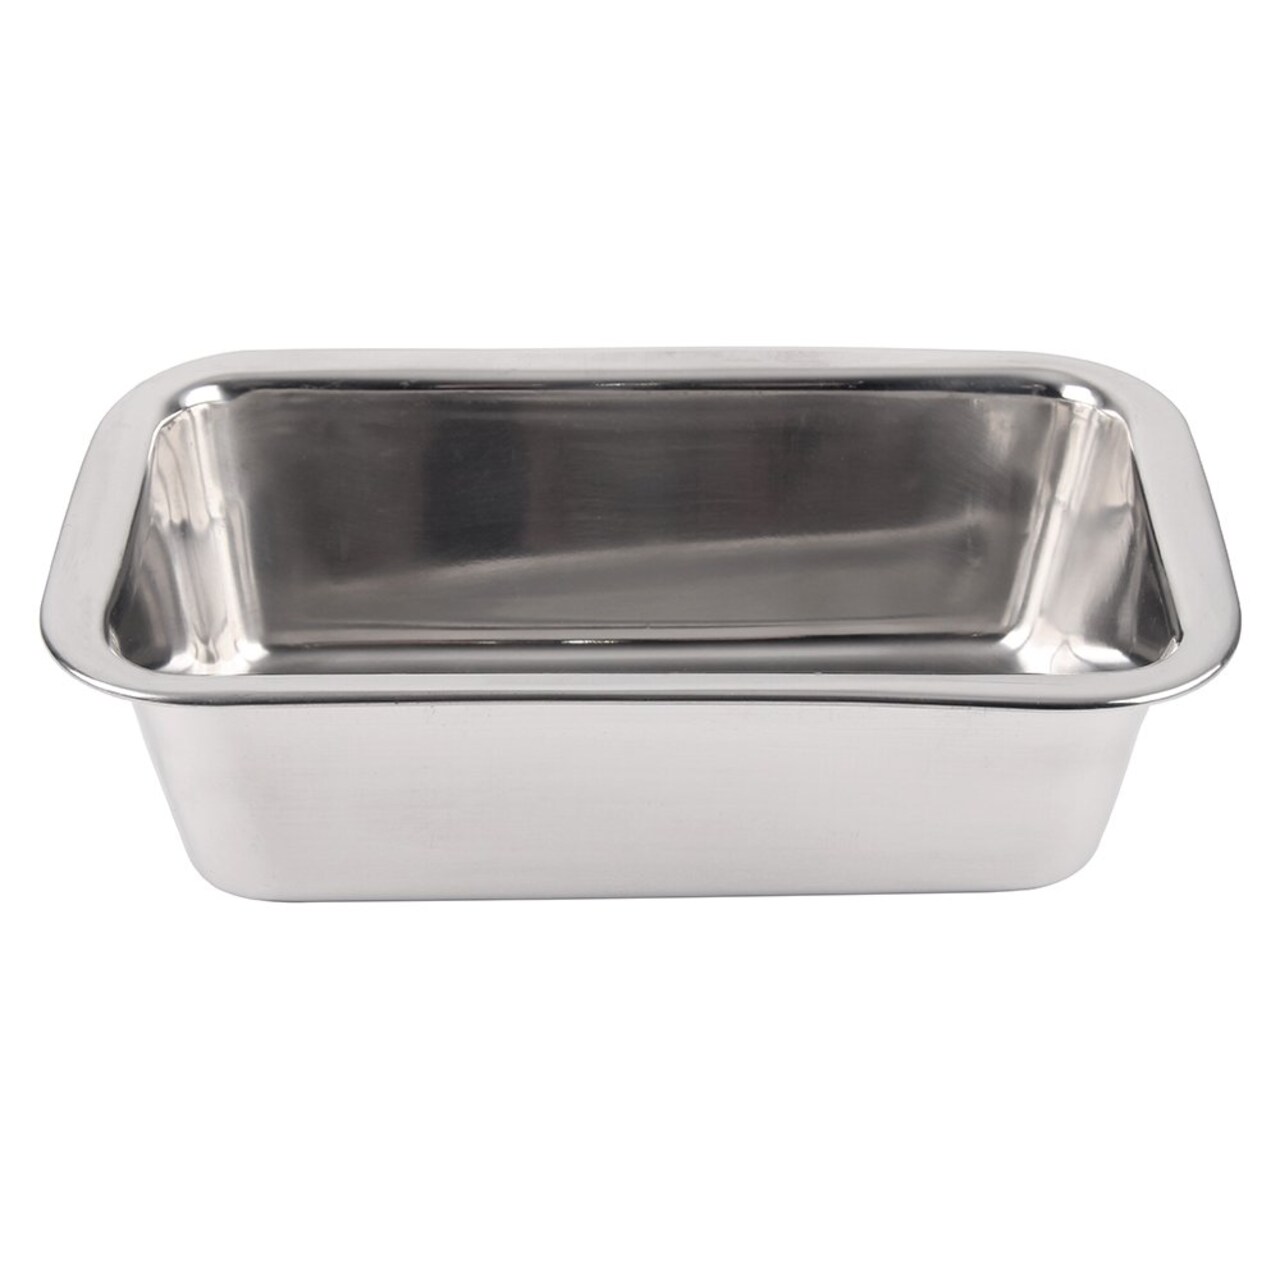 Shetler's Stainless Steel Round Edge Bread Loaf and Cake Pan 2.5 W x 8 L  x 2.75 D